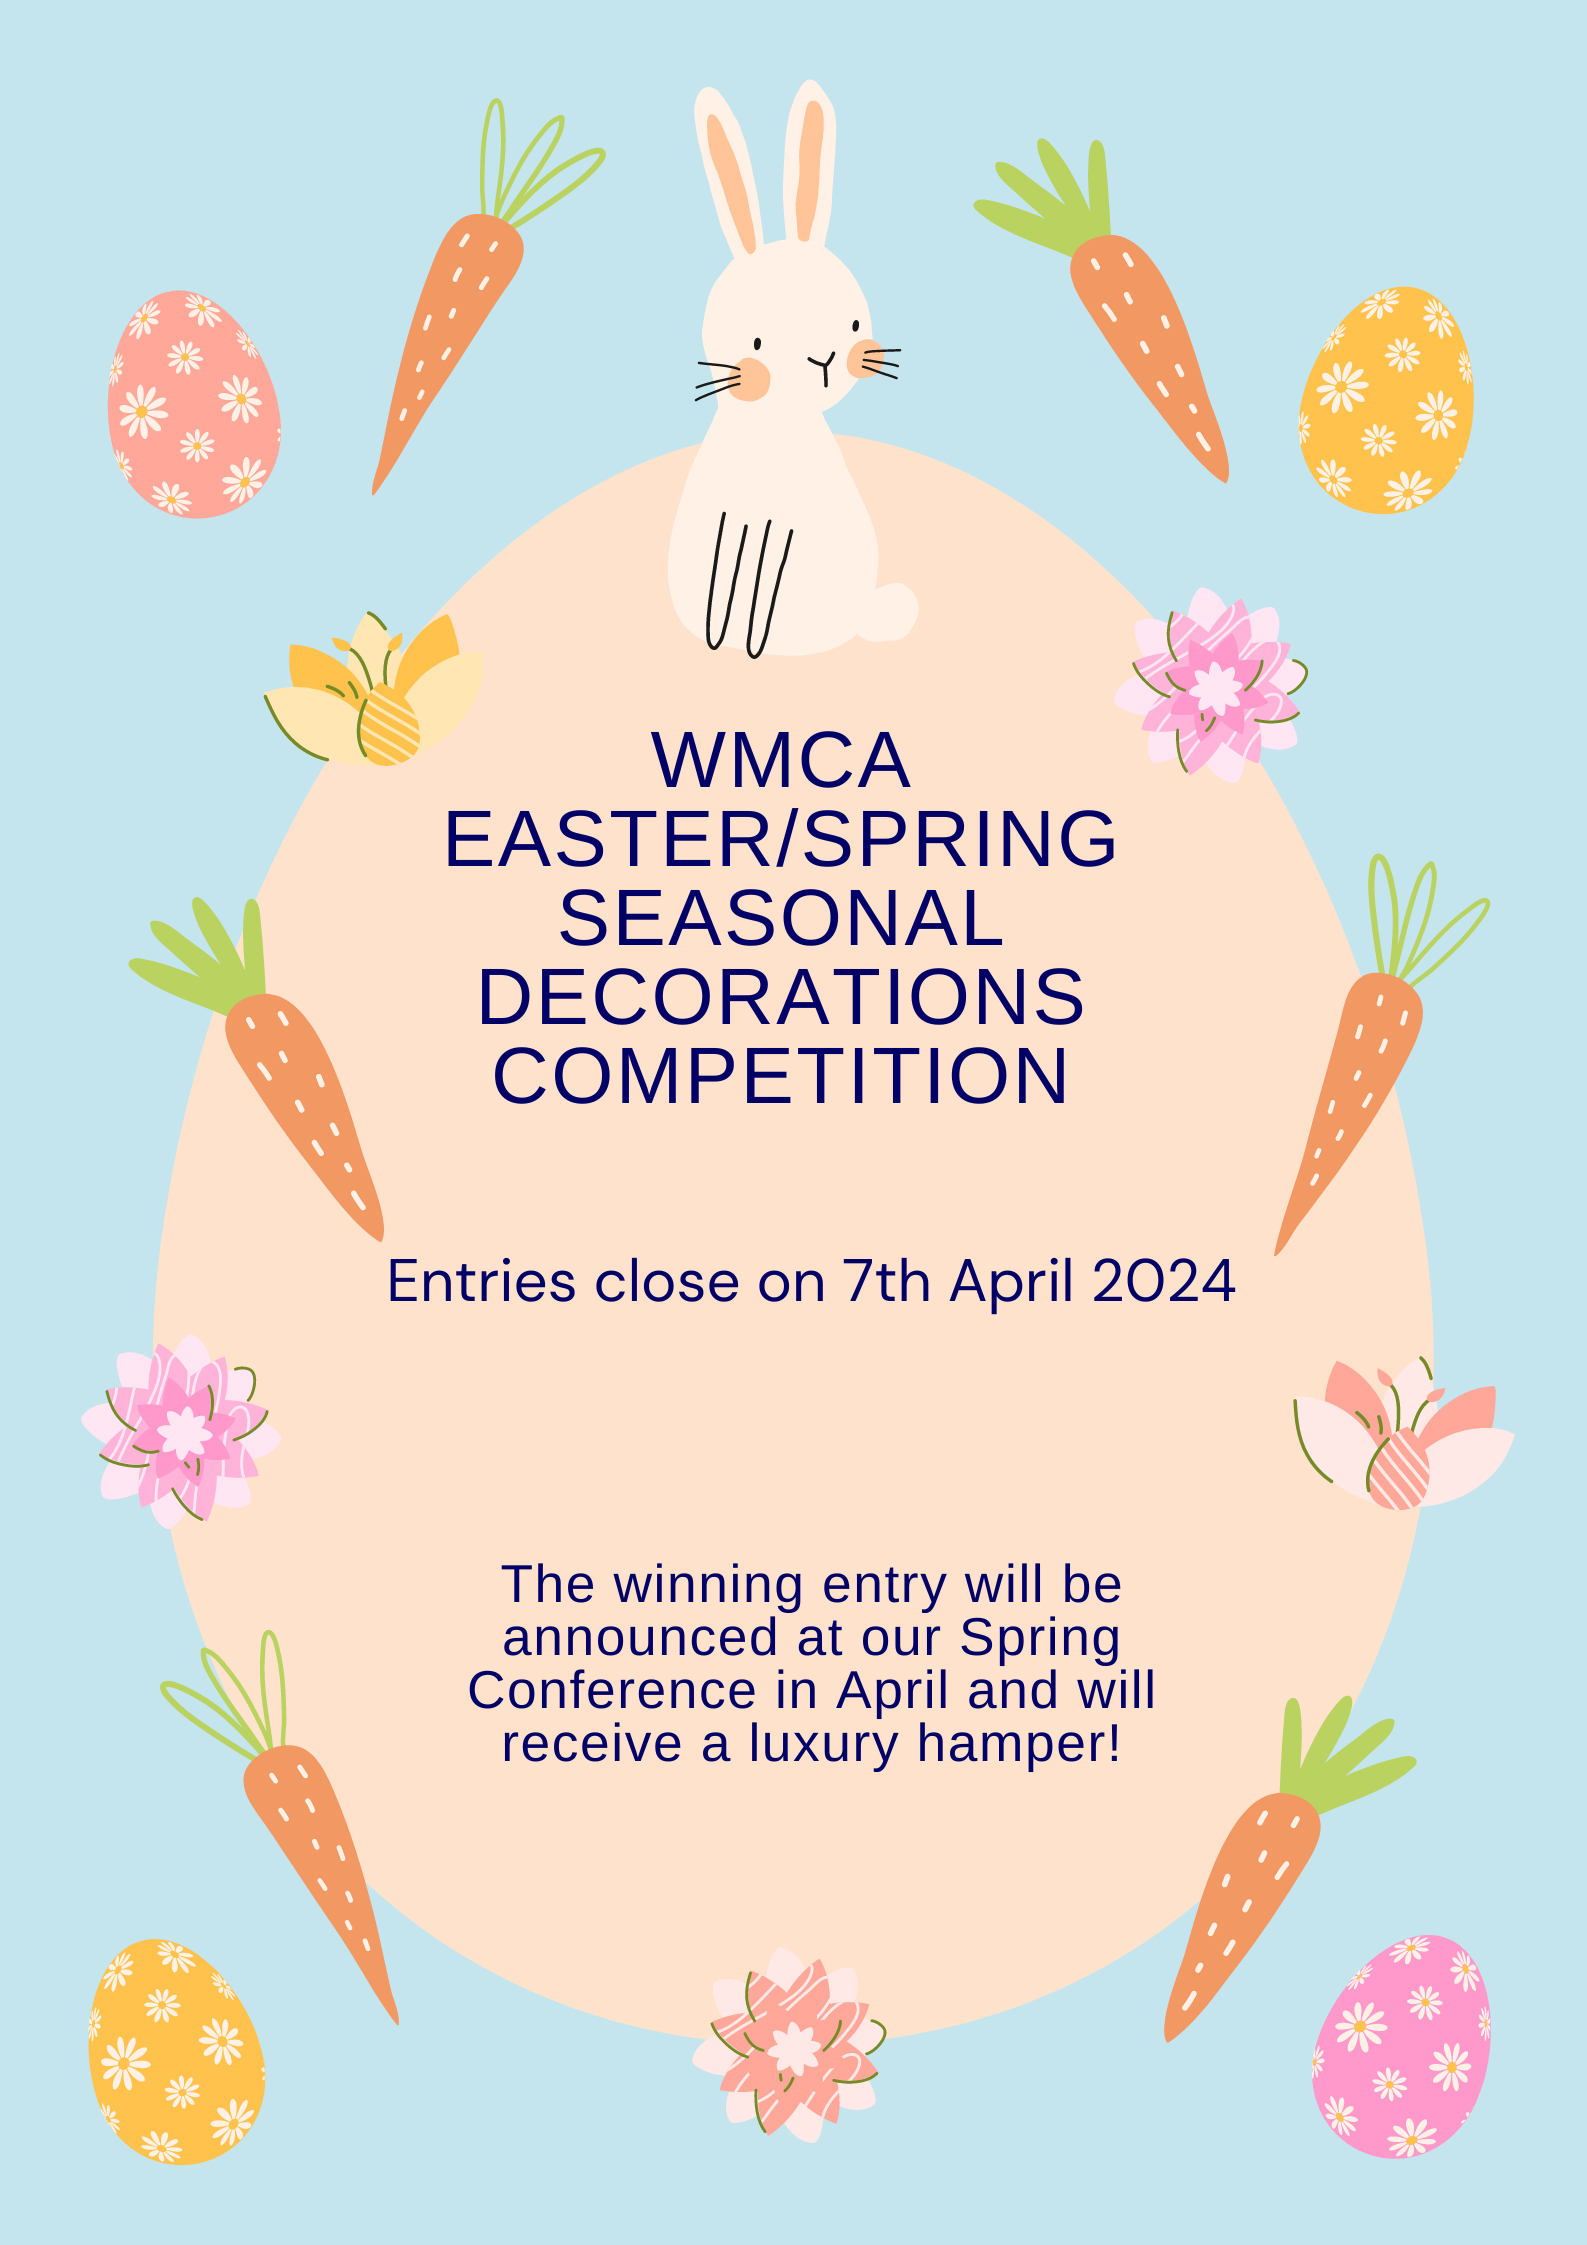 https://stratus.campaign-image.eu/images/32883000015474056_zc_v1_1711461954343_wmca_easterspring_seasonal_decorations_competition.png